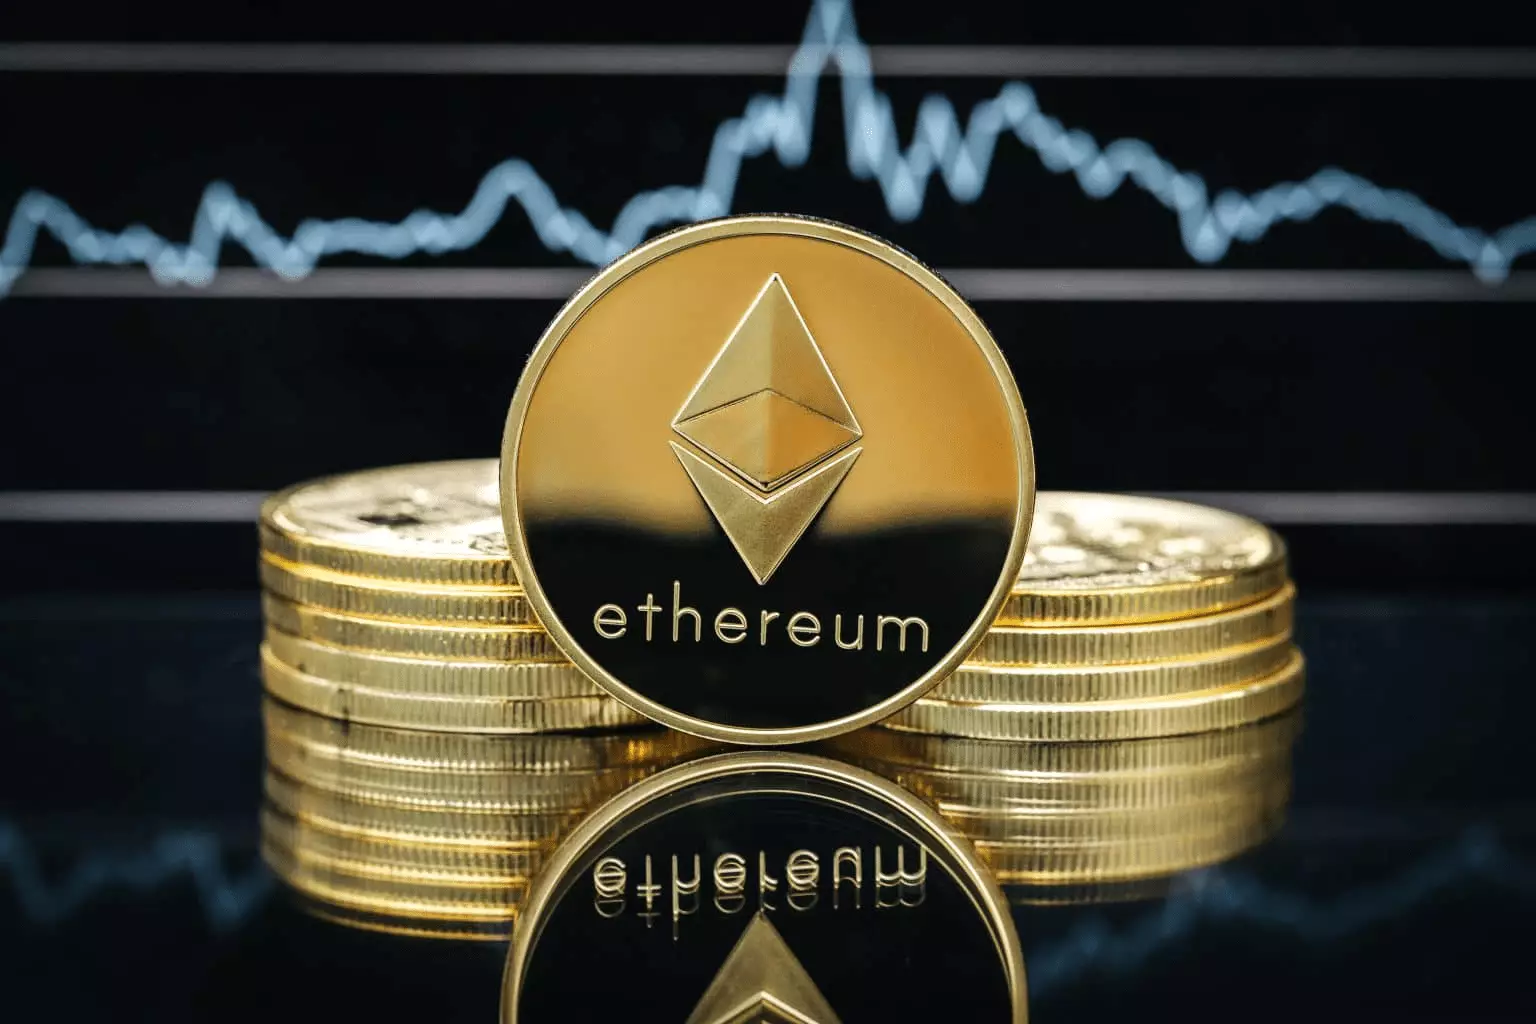 Ethereum Uses Significantly Less Energy Than American Express, Deutsche Bank, and Other Legacy Businesses